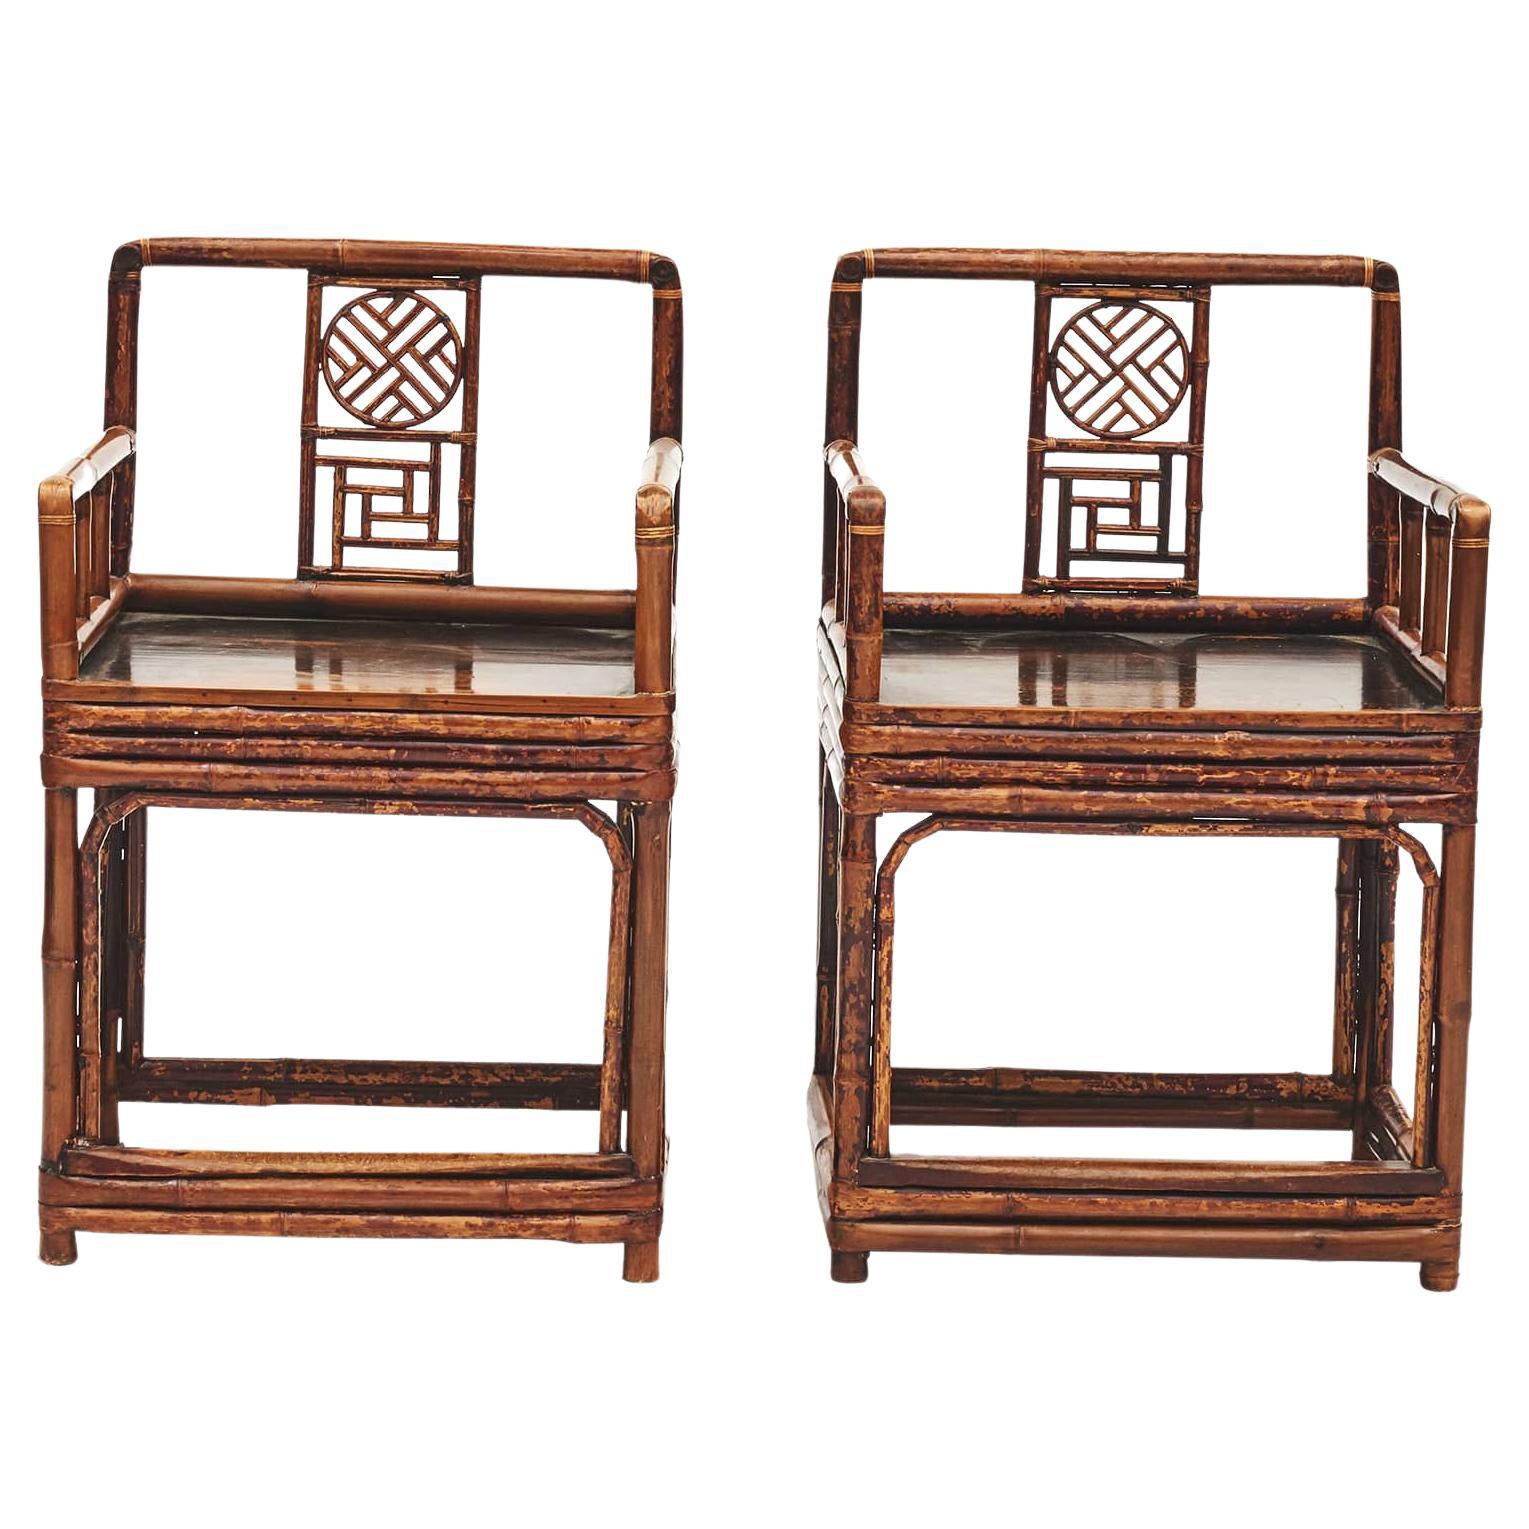 Pair of 19th Century Chinese Bamboo Arm Chairs in Original Condition